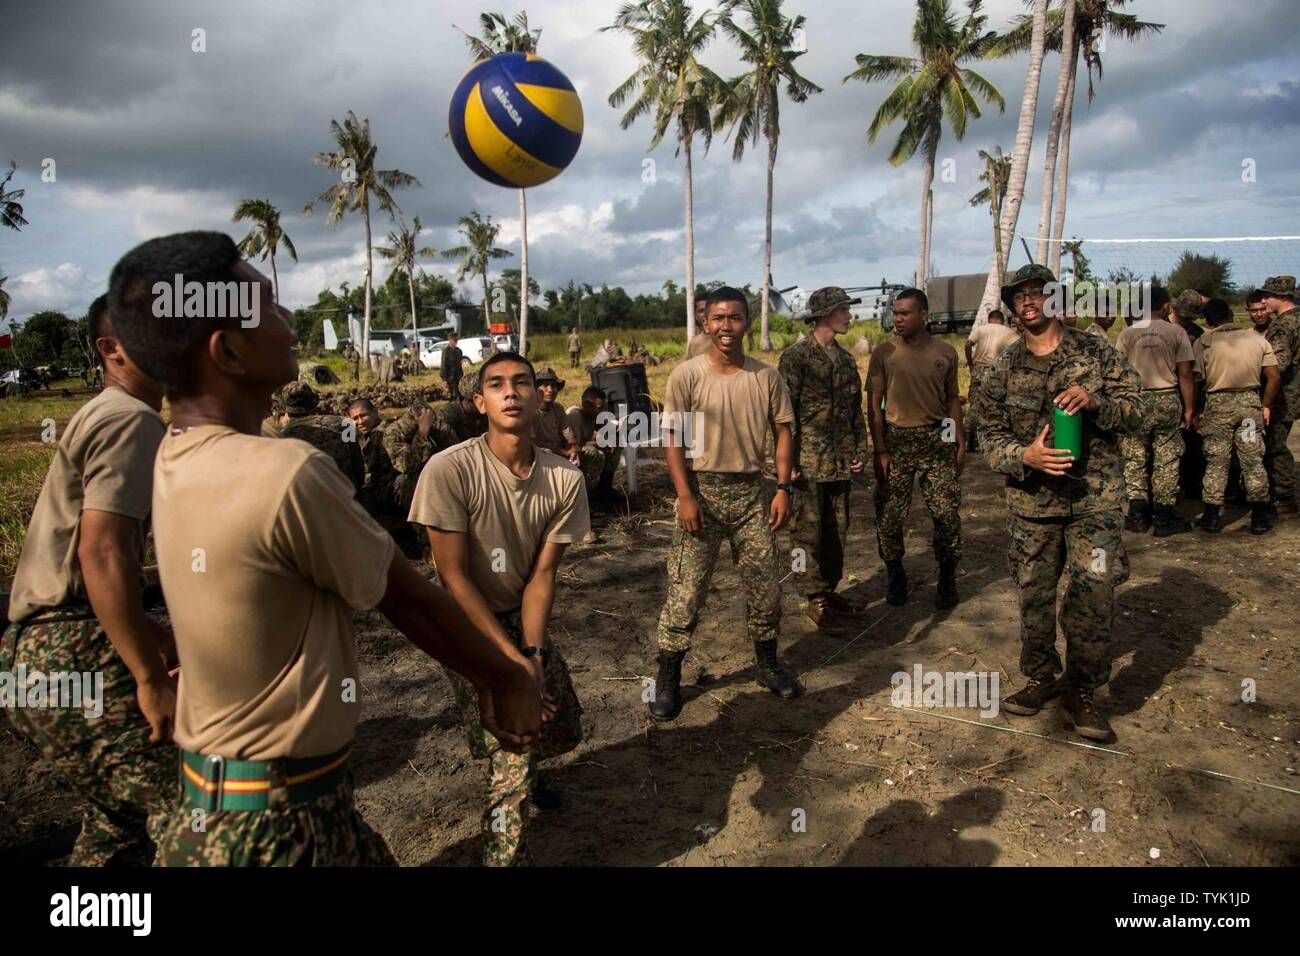 SABAH PROVINCE, Malaysia (November 11, 2016) Soldiers with 7th Battalion, Royal Malay Regiment, take part in hitting around a volleyball and engaging in small talk with Marines of the 11th Marine Expeditionary Unit during Exercise Tiger Strike 2016 in Sabah Province, Malaysia, November 12, 2016. Exercise Tiger Strike is a bilateral training exercise led by the RMR and supported by the MEU, conducted to enhance the two forces' ability to communicate, plan, and execute combined amphibious operations in support of security and stability in the region. Stock Photo